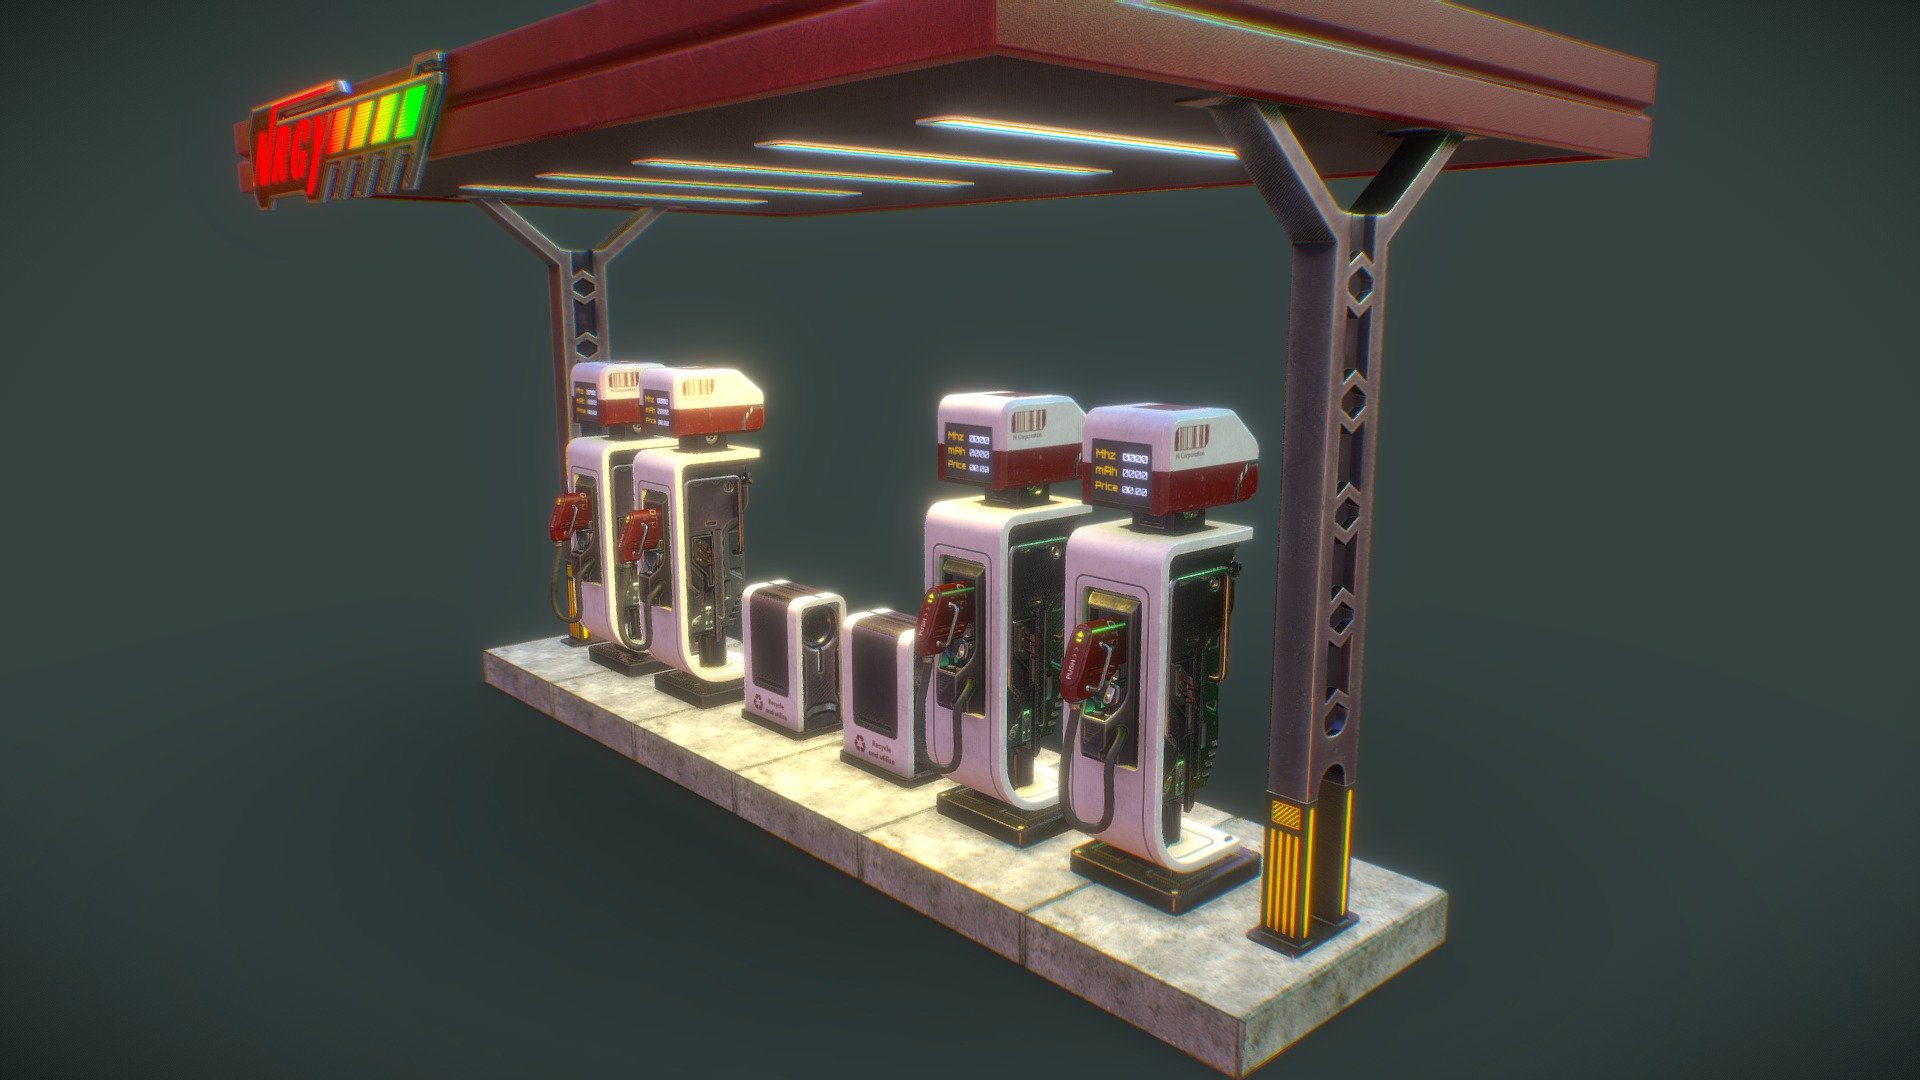 Energy Station for recharging vehicles. The asset is semi moduled, so you can just take what you need.
There is a tris propertys in annotations. 

Concept art - Won Jun Tae 3d model